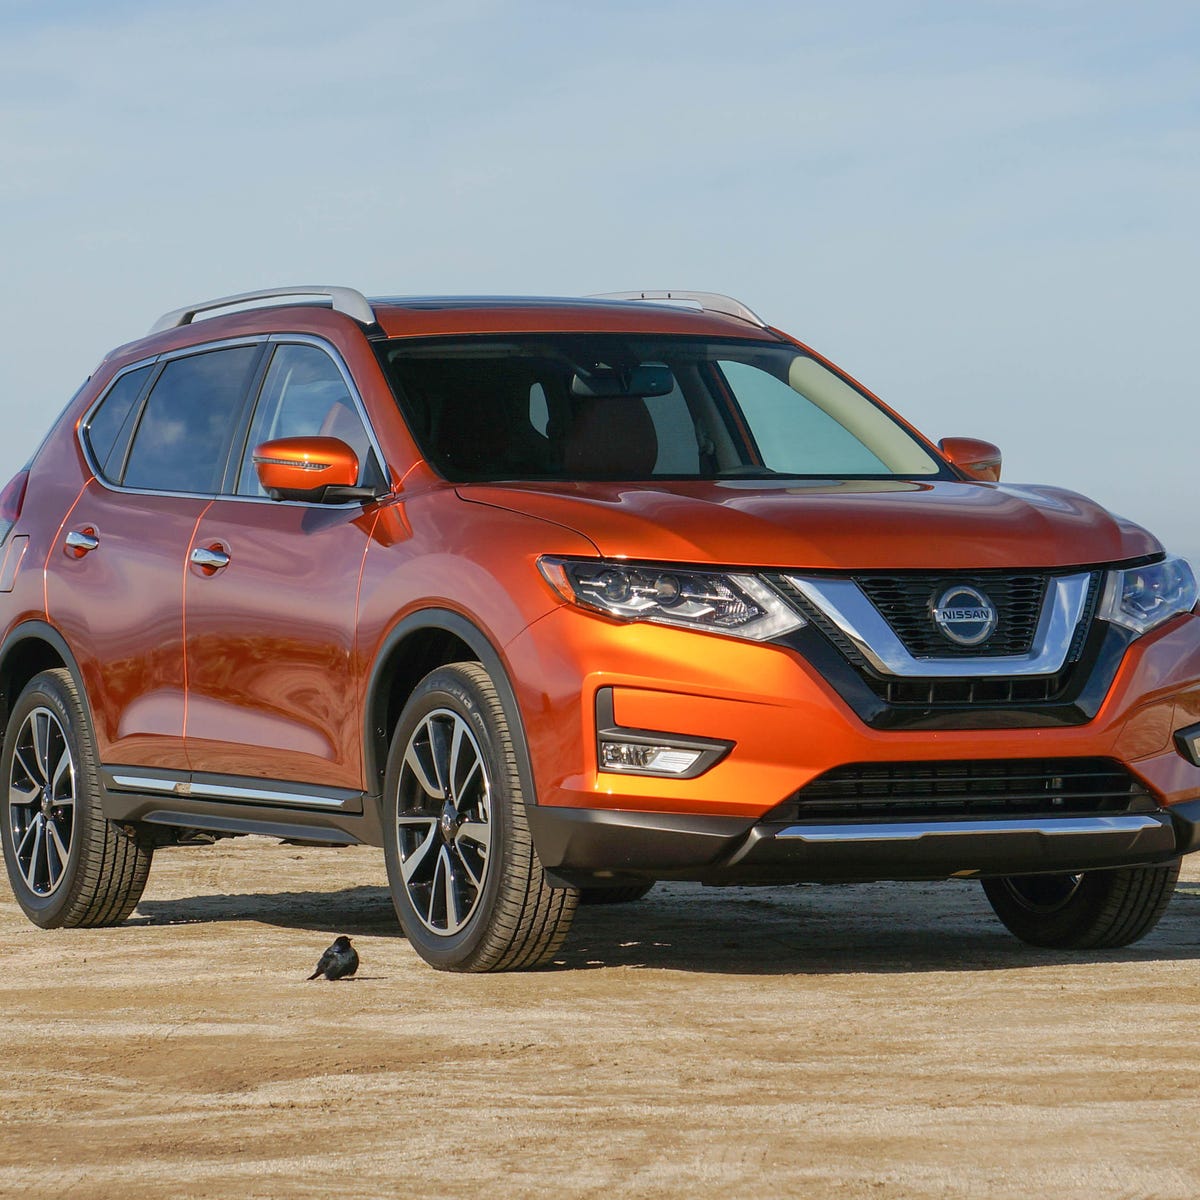 2018 Nissan Rogue Review: ratings, specs, photos, price, video, more - CNET